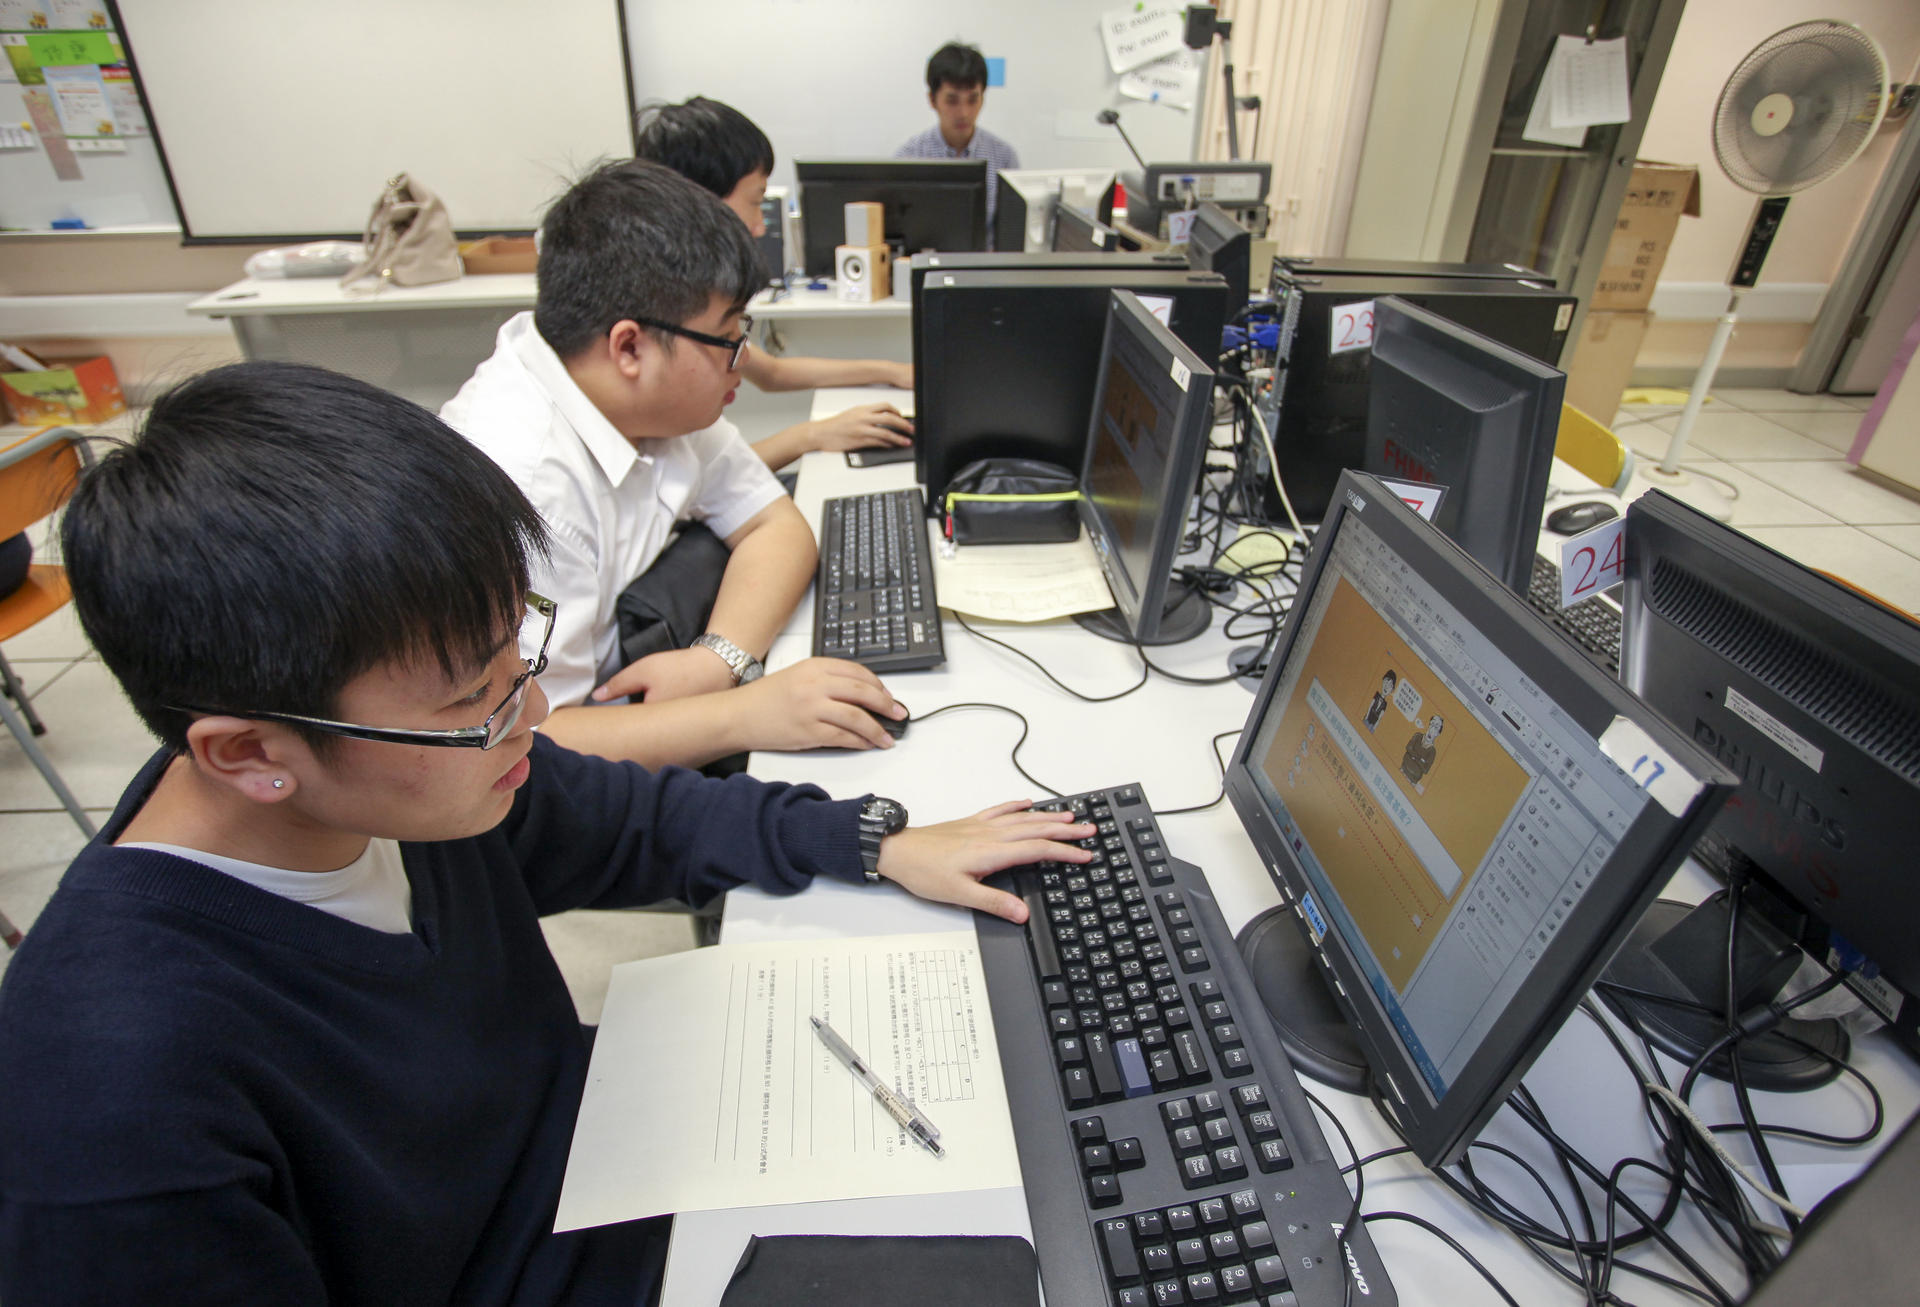 It isn't difficult to motivate youngsters to master the technology for learning. Photo: Paul Yeung